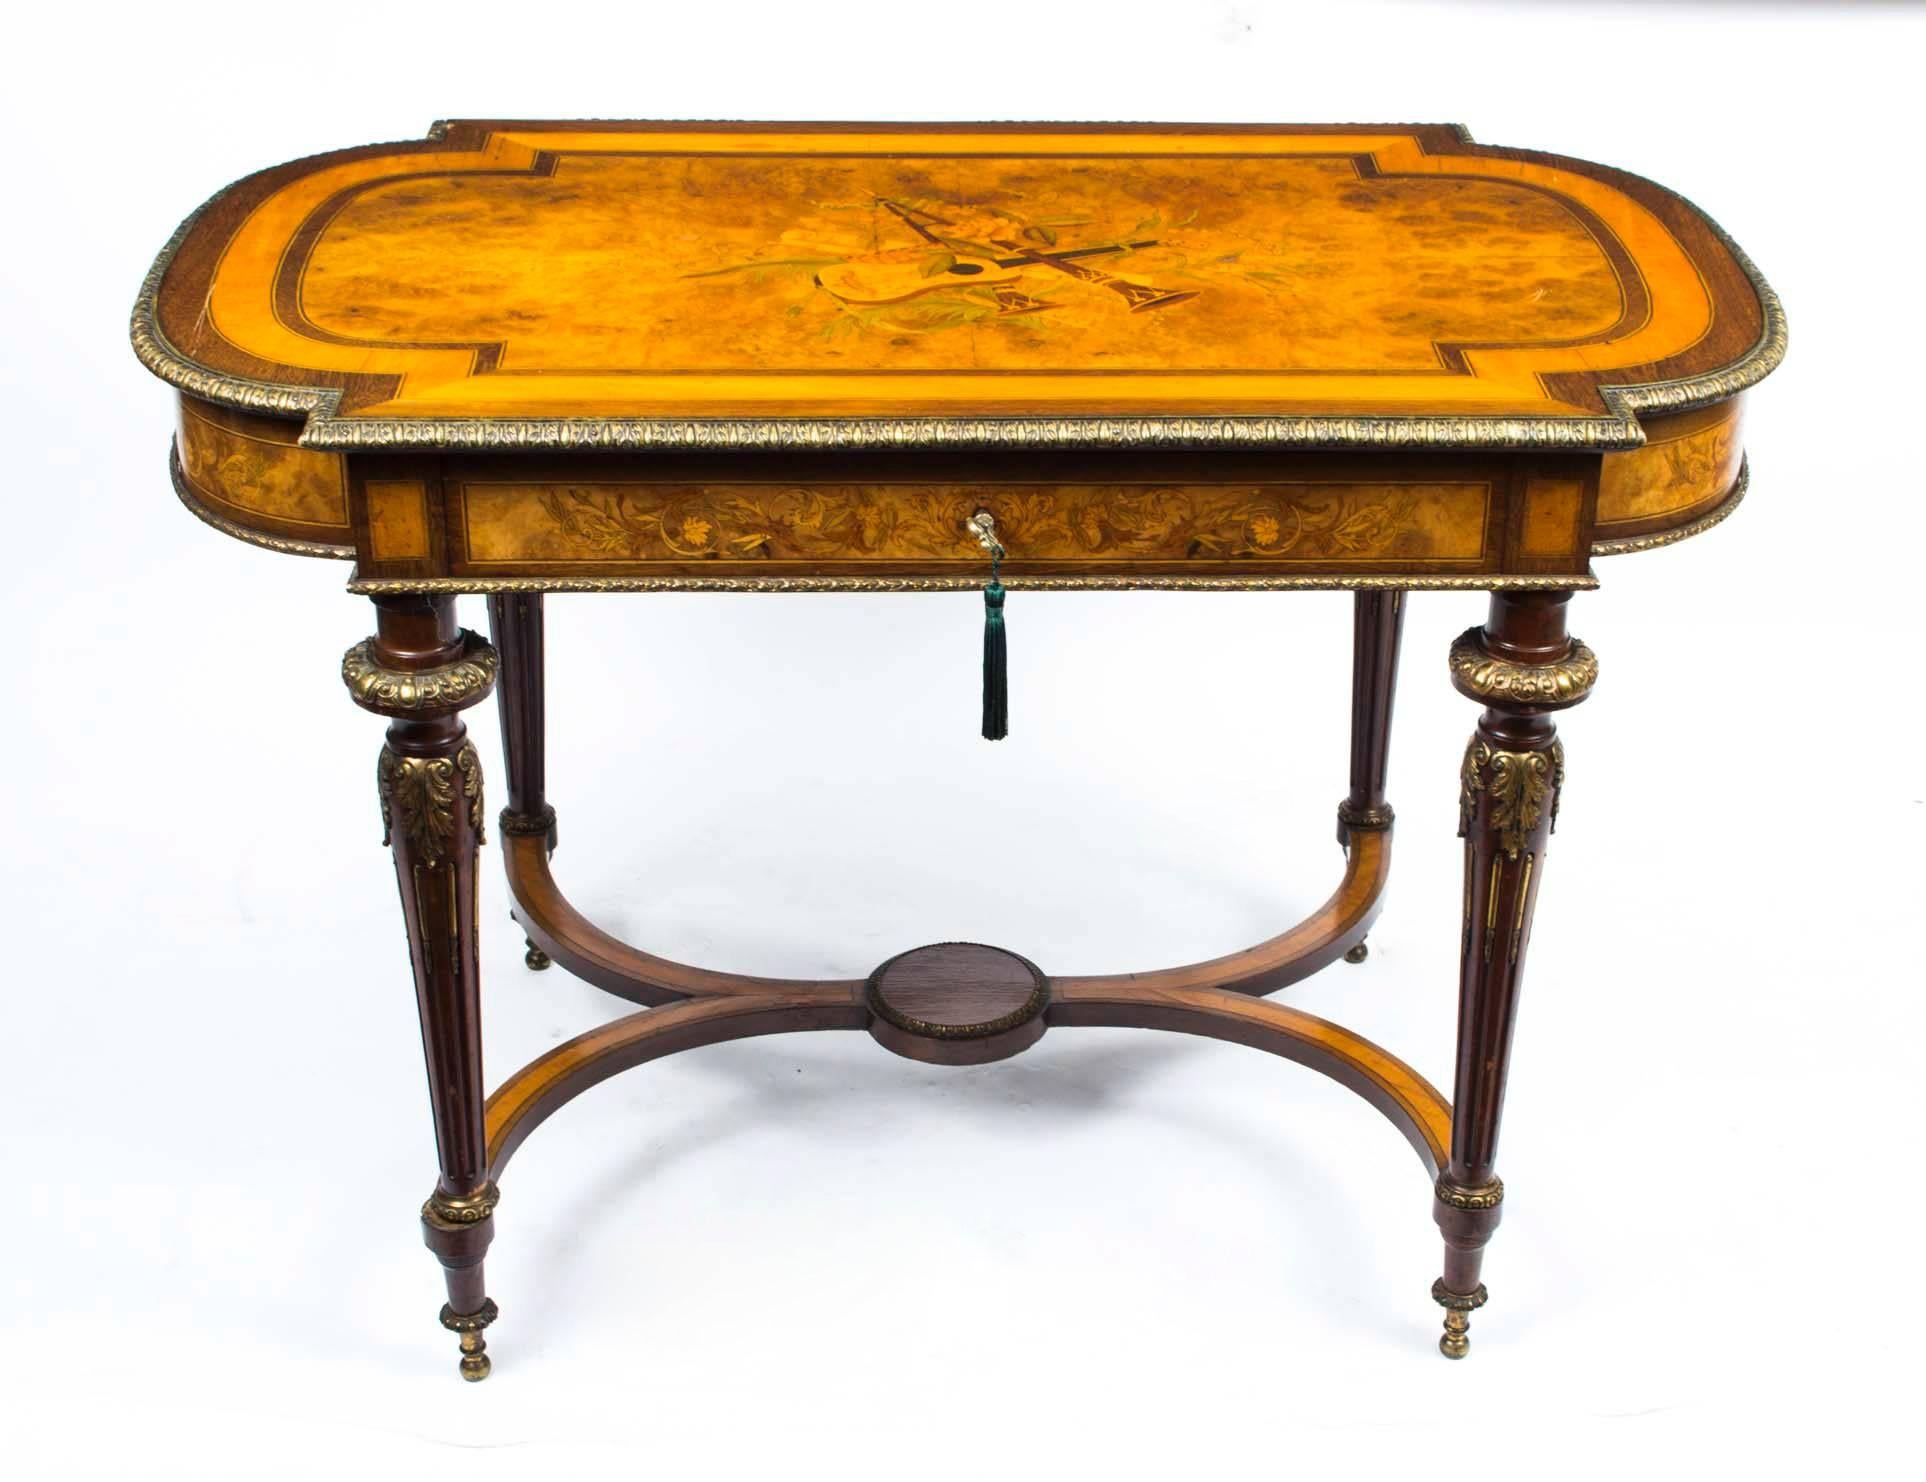 This is a gorgeous antique French ormolu mounted marquetry rosewood and burr walnut bureau plat or centre table, circa 1860 in date. 

This fabulous table features beautiful marquetry decoration in kingwood and purple heart with elegant ormolu